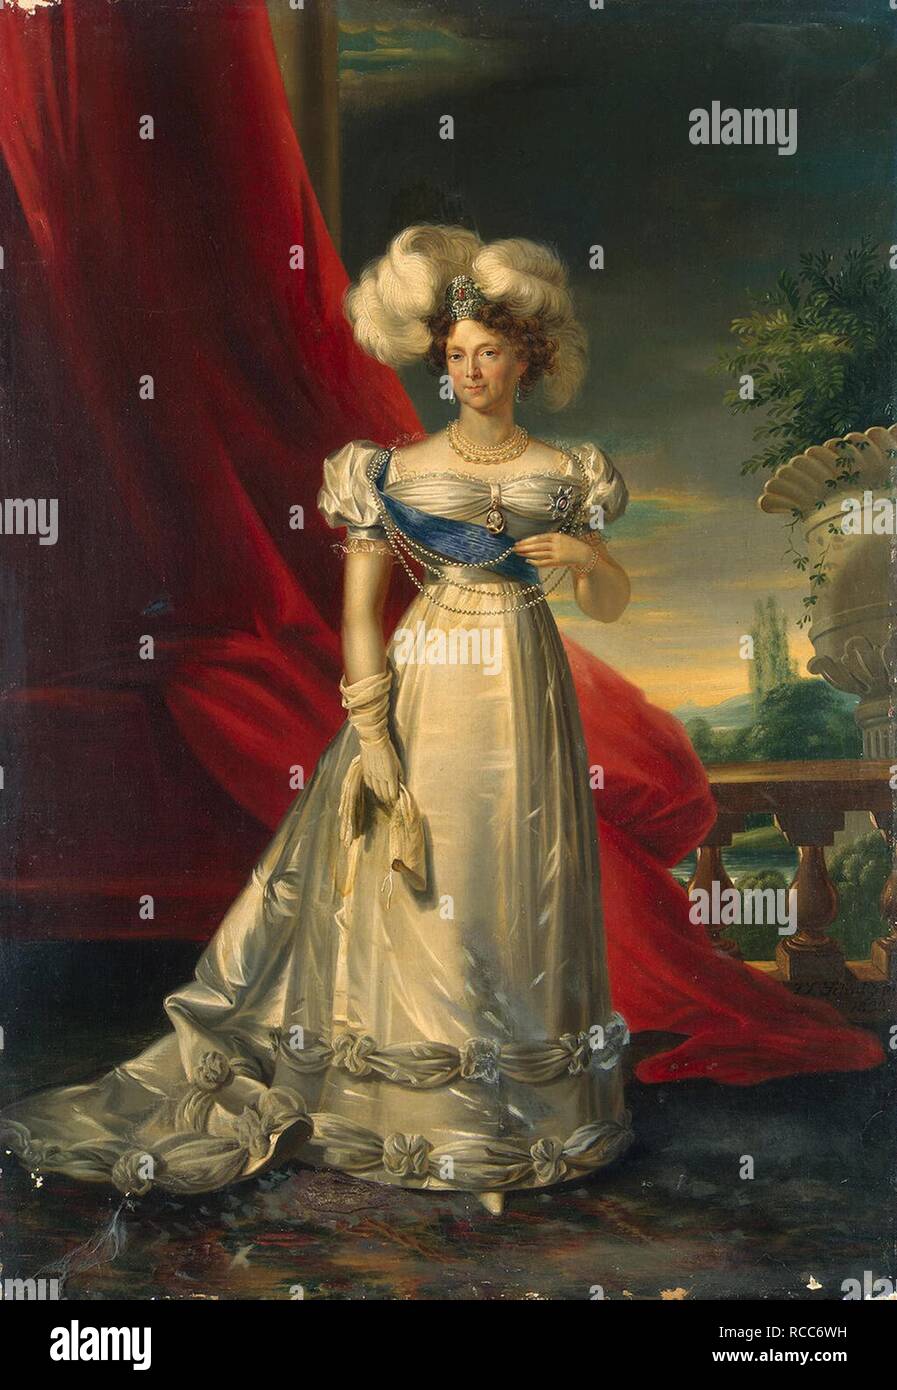 Portrait of Empress Maria Feodorovna (Sophie Dorothea of Württemberg) (1759-1828). Museum: State Hermitage, St. Petersburg. Author: Schultz, Ludwig. Stock Photo